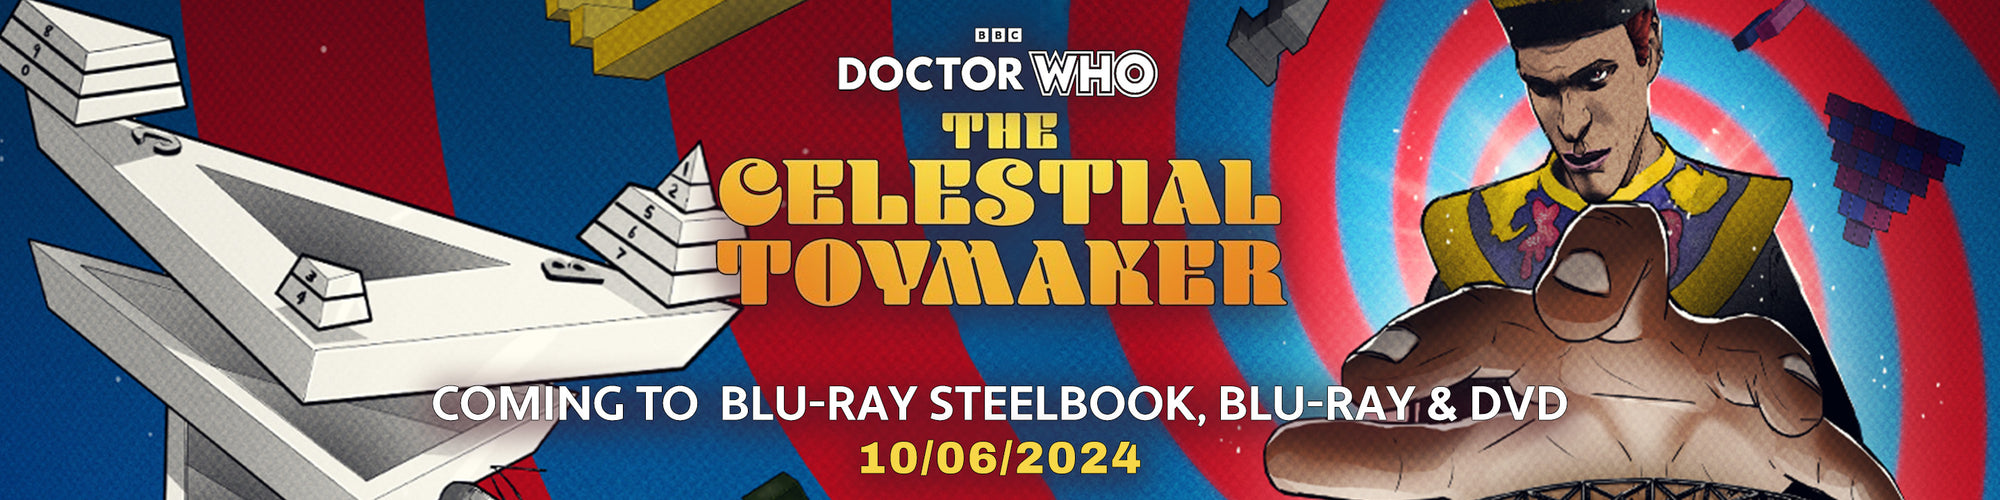 Doctor Who The Celestial Toymaker